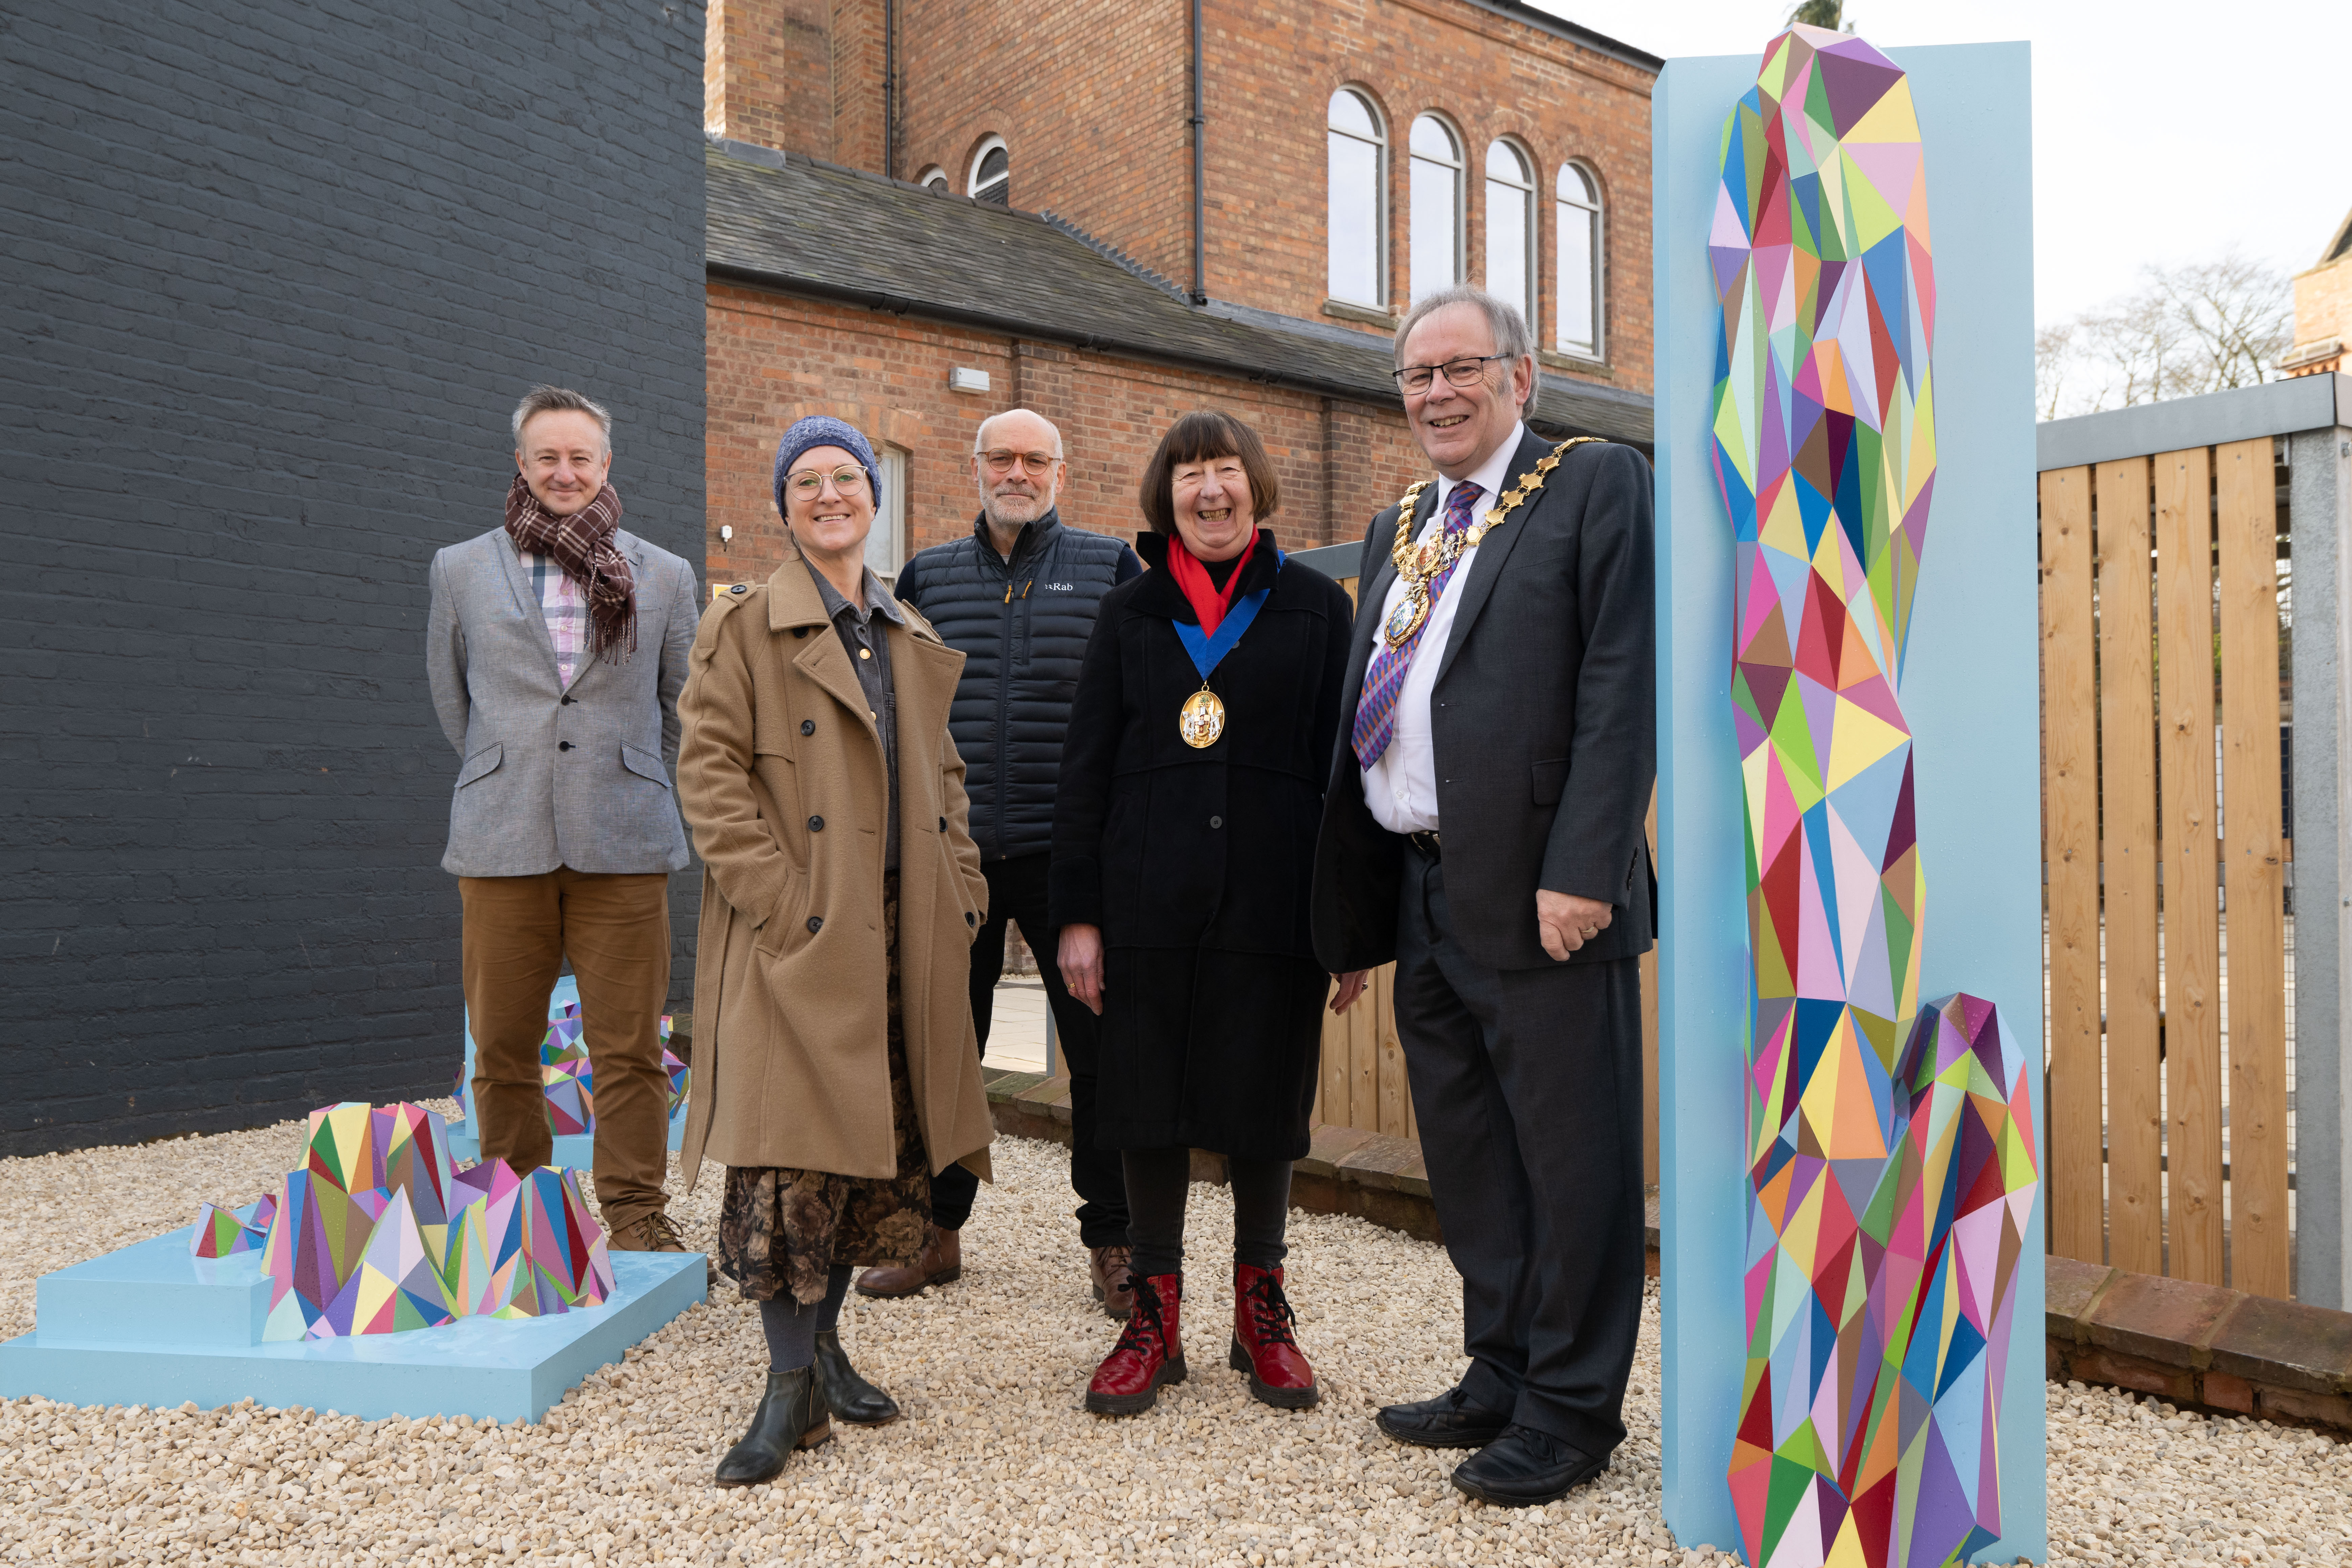 State-of-the-art sculptures unveiled at Leamington's Spencer Yard